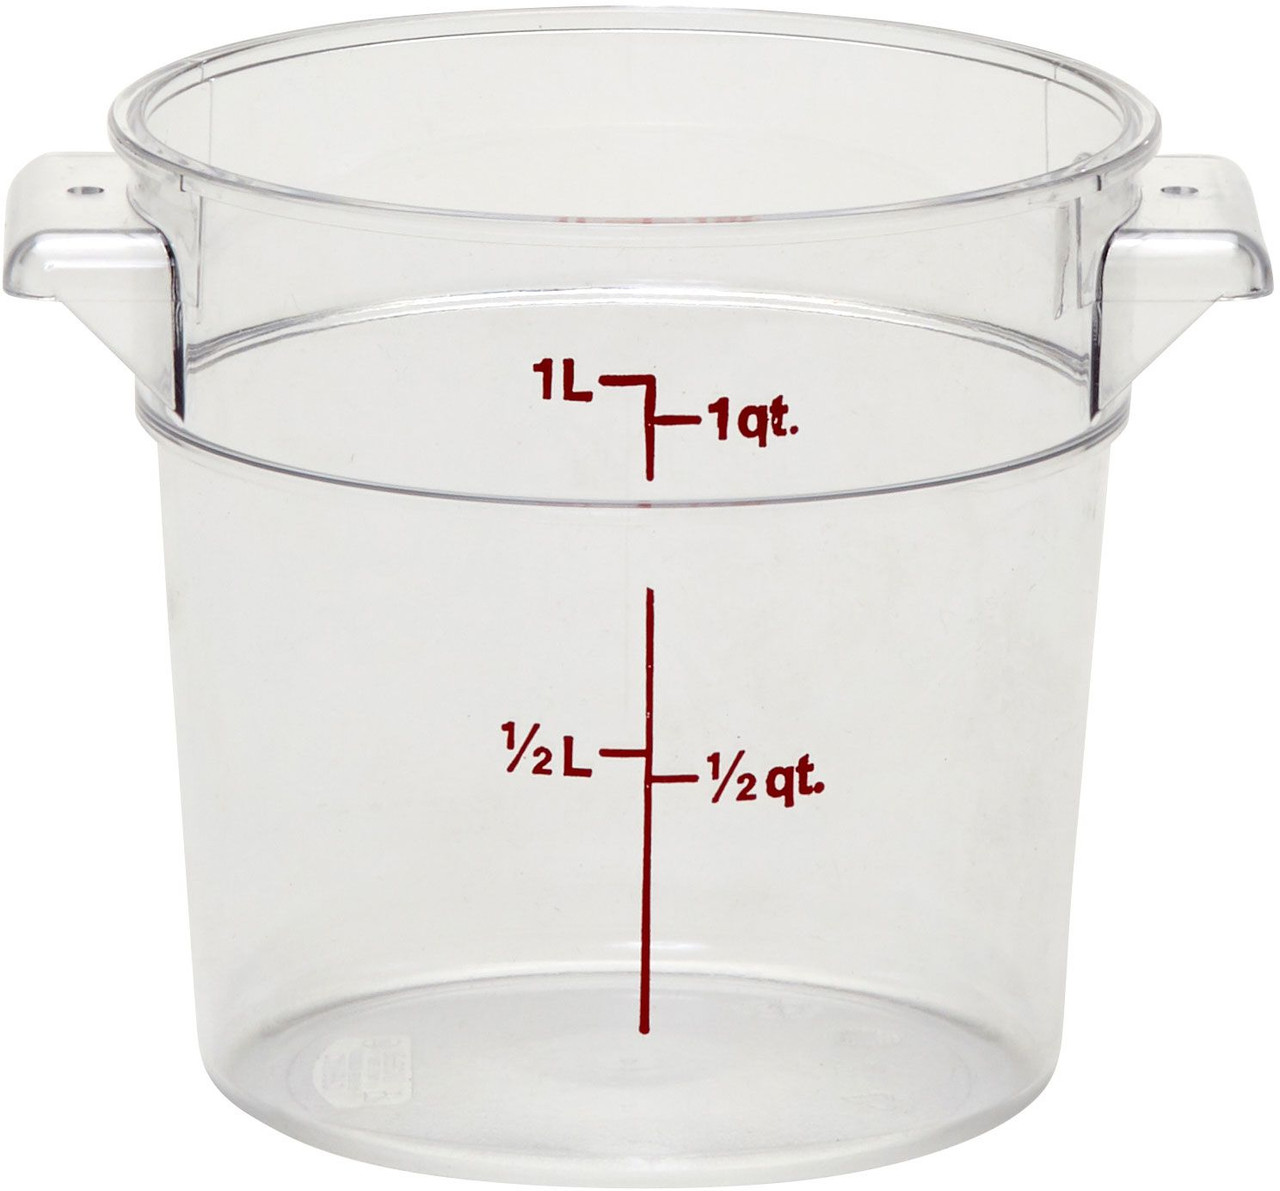 Cambro RFSCW1135 1 Quart Round Polycarbonate Food Storage Container